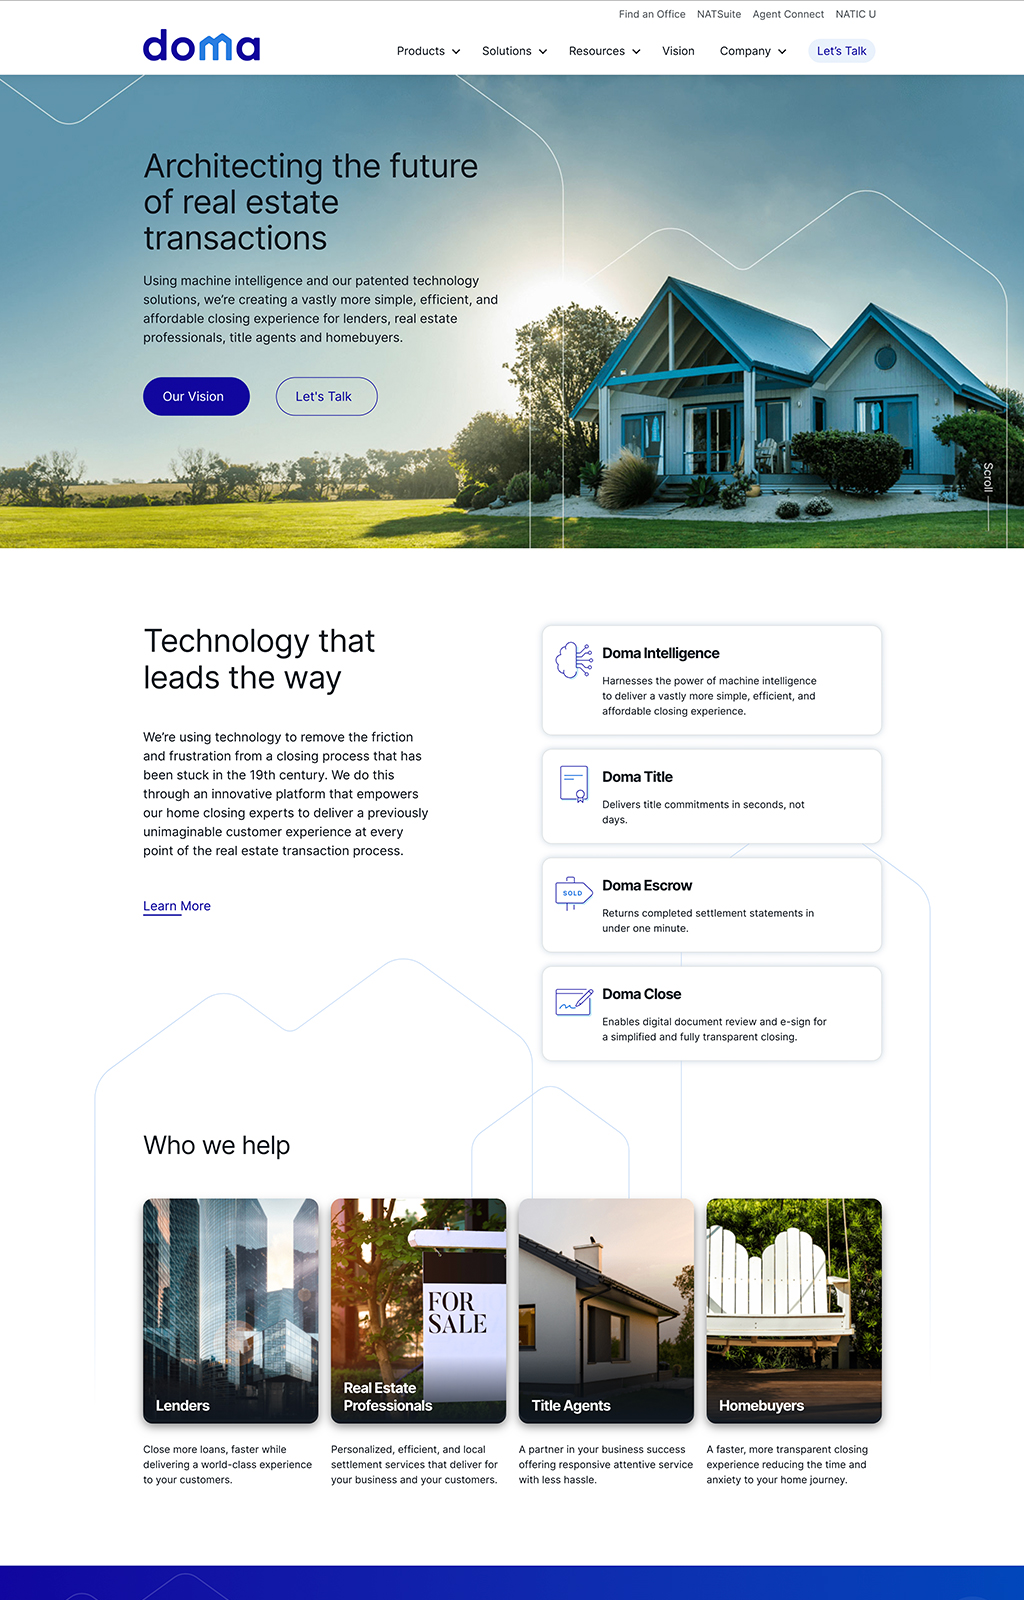 The main Doma website showcasing our new branding and utilizing the M shape to connect back to home and community